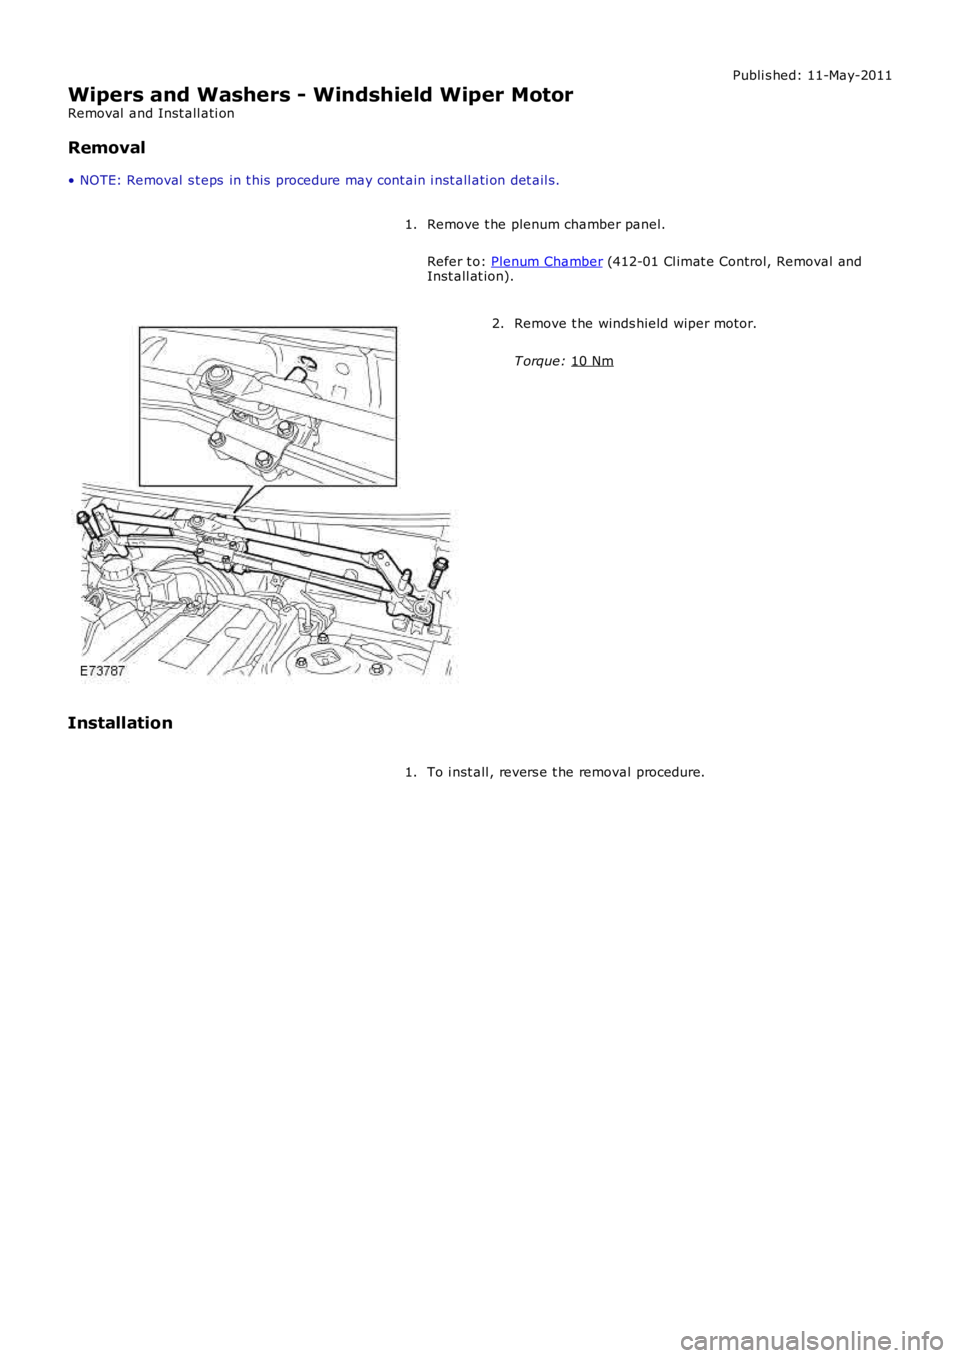 LAND ROVER FRELANDER 2 2006  Repair Manual Publi s hed: 11-May-2011
Wipers and Washers - Windshield Wiper Motor
Removal  and Inst all ati on
Removal
• NOTE: Removal  s t eps  in t his  procedure may cont ain i nst all ati on det ail s.
Remov